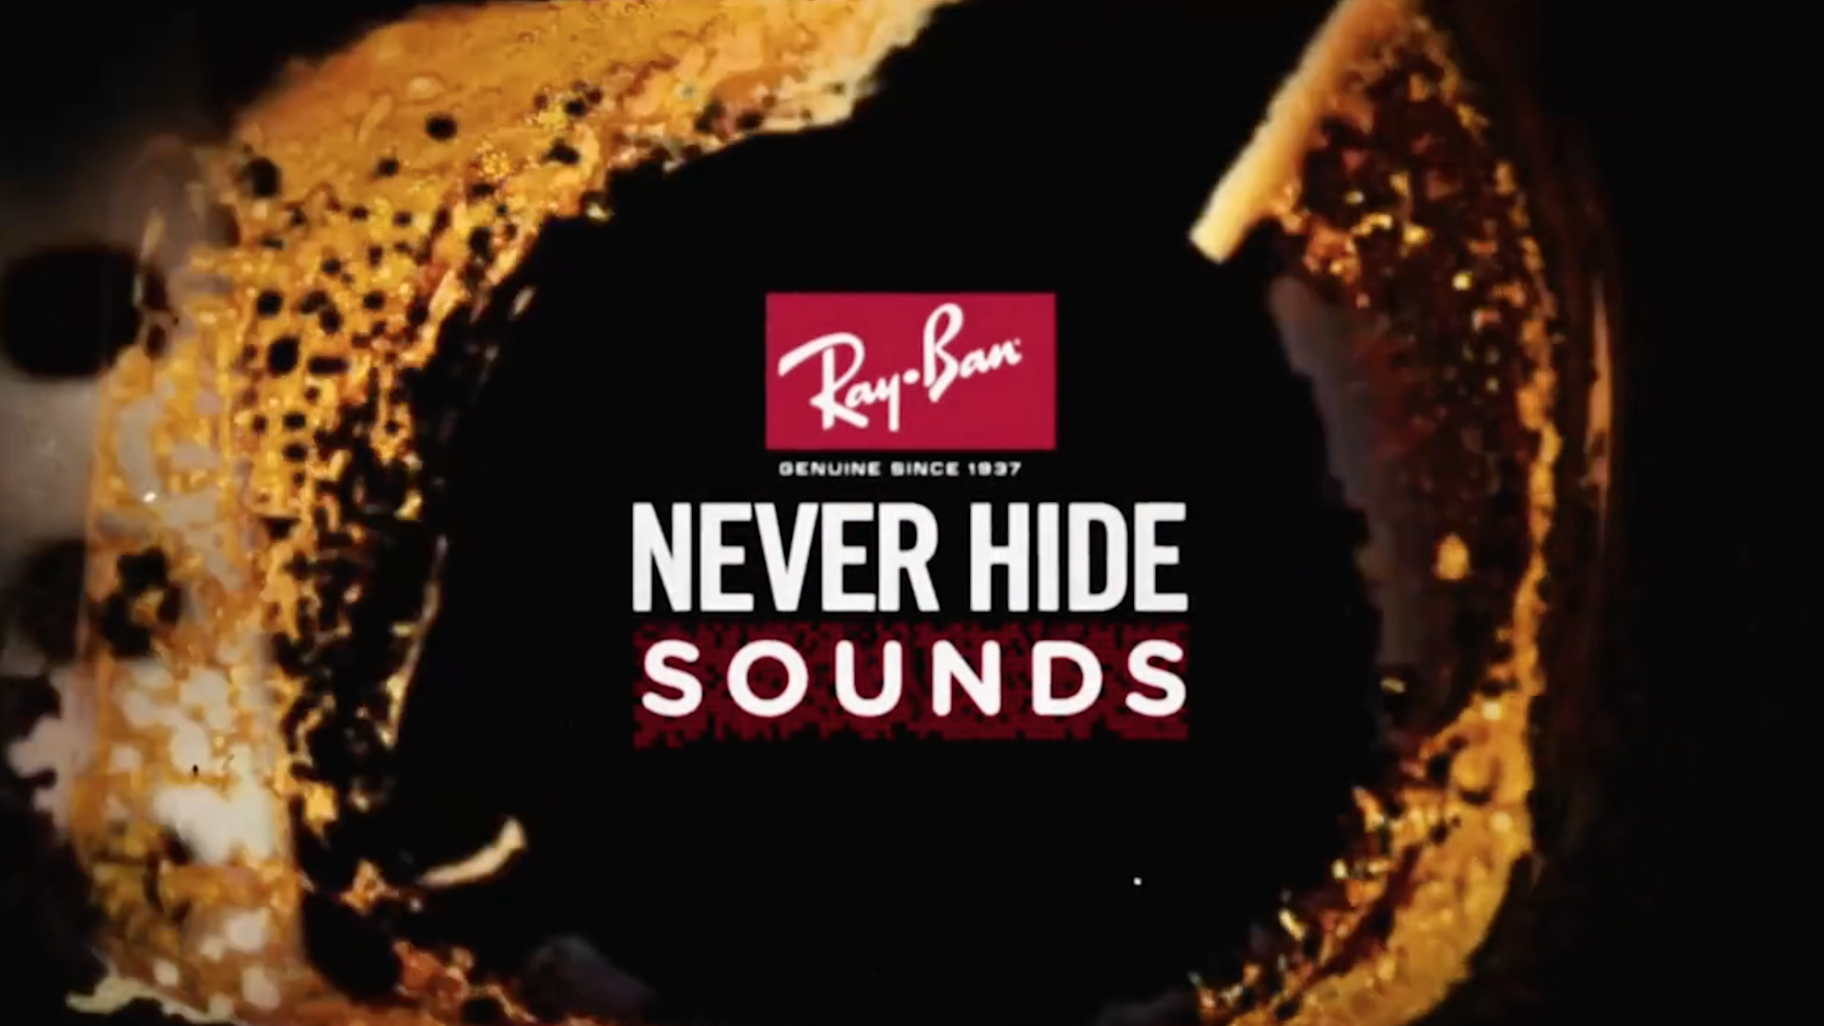 RAYBAN NEVER HIDE SOUNDS -